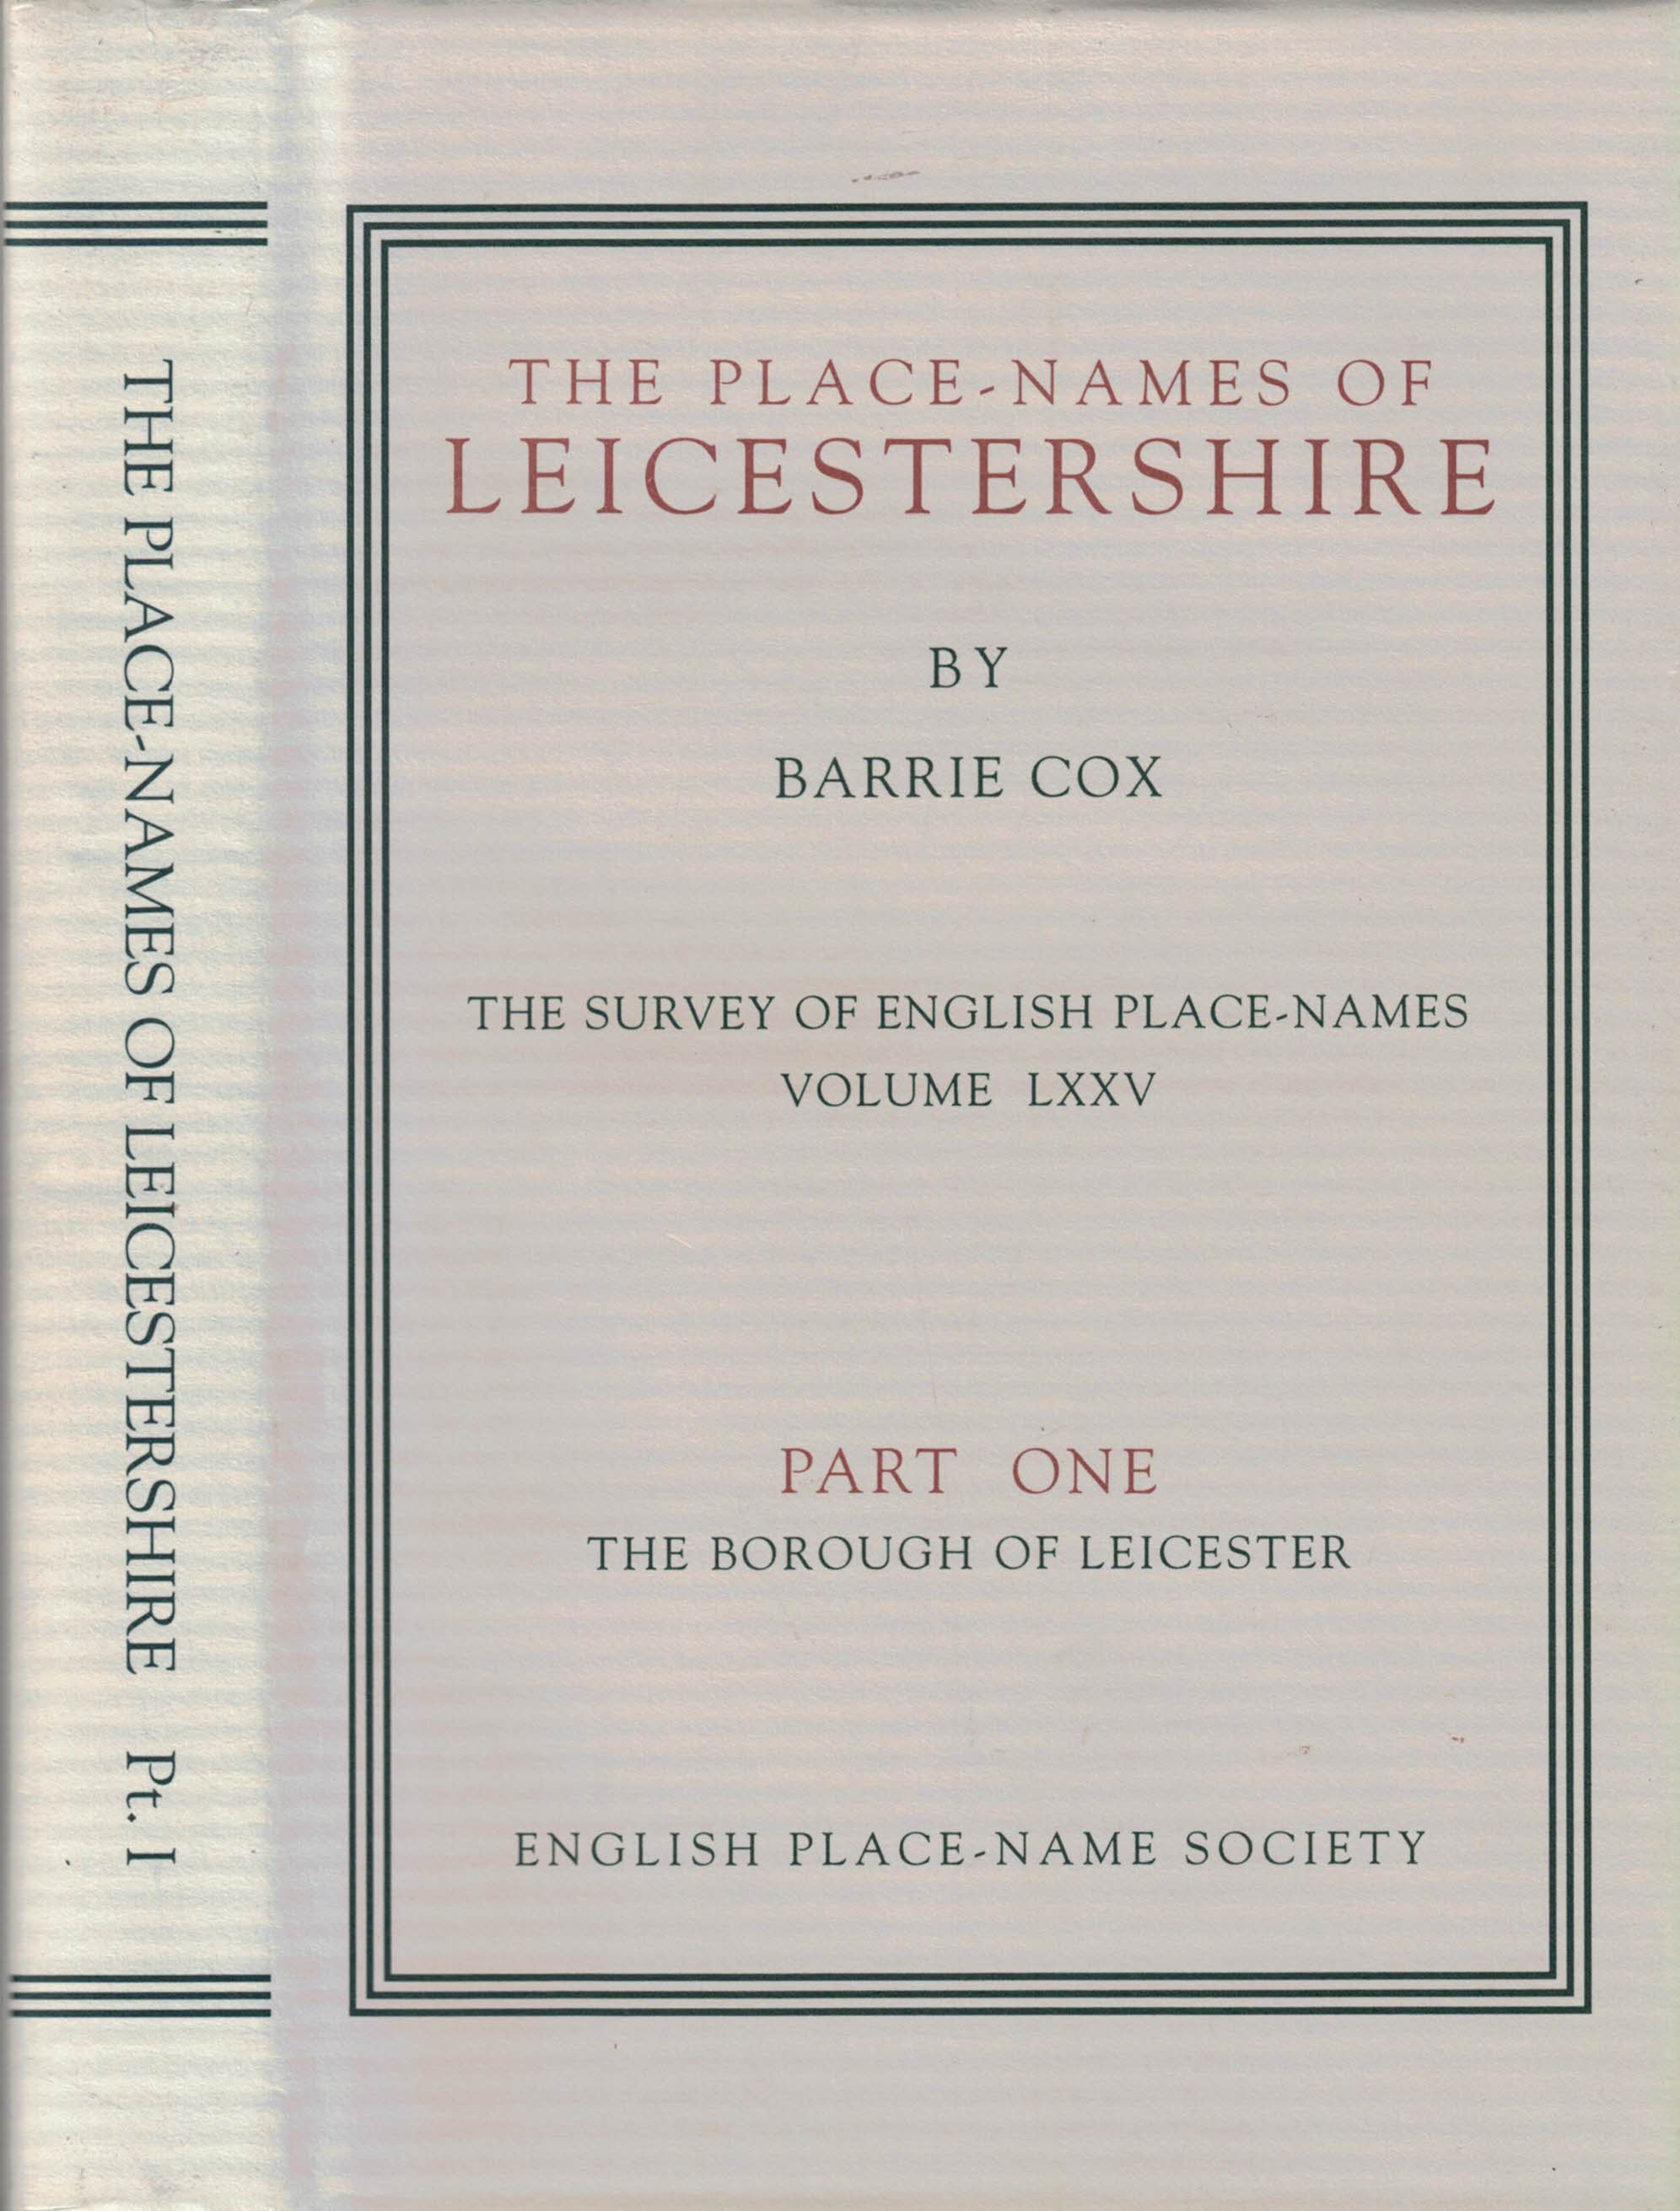 The Place-Names of Leicestershire, Part 1.  English Place-Name Society, Volume 75.